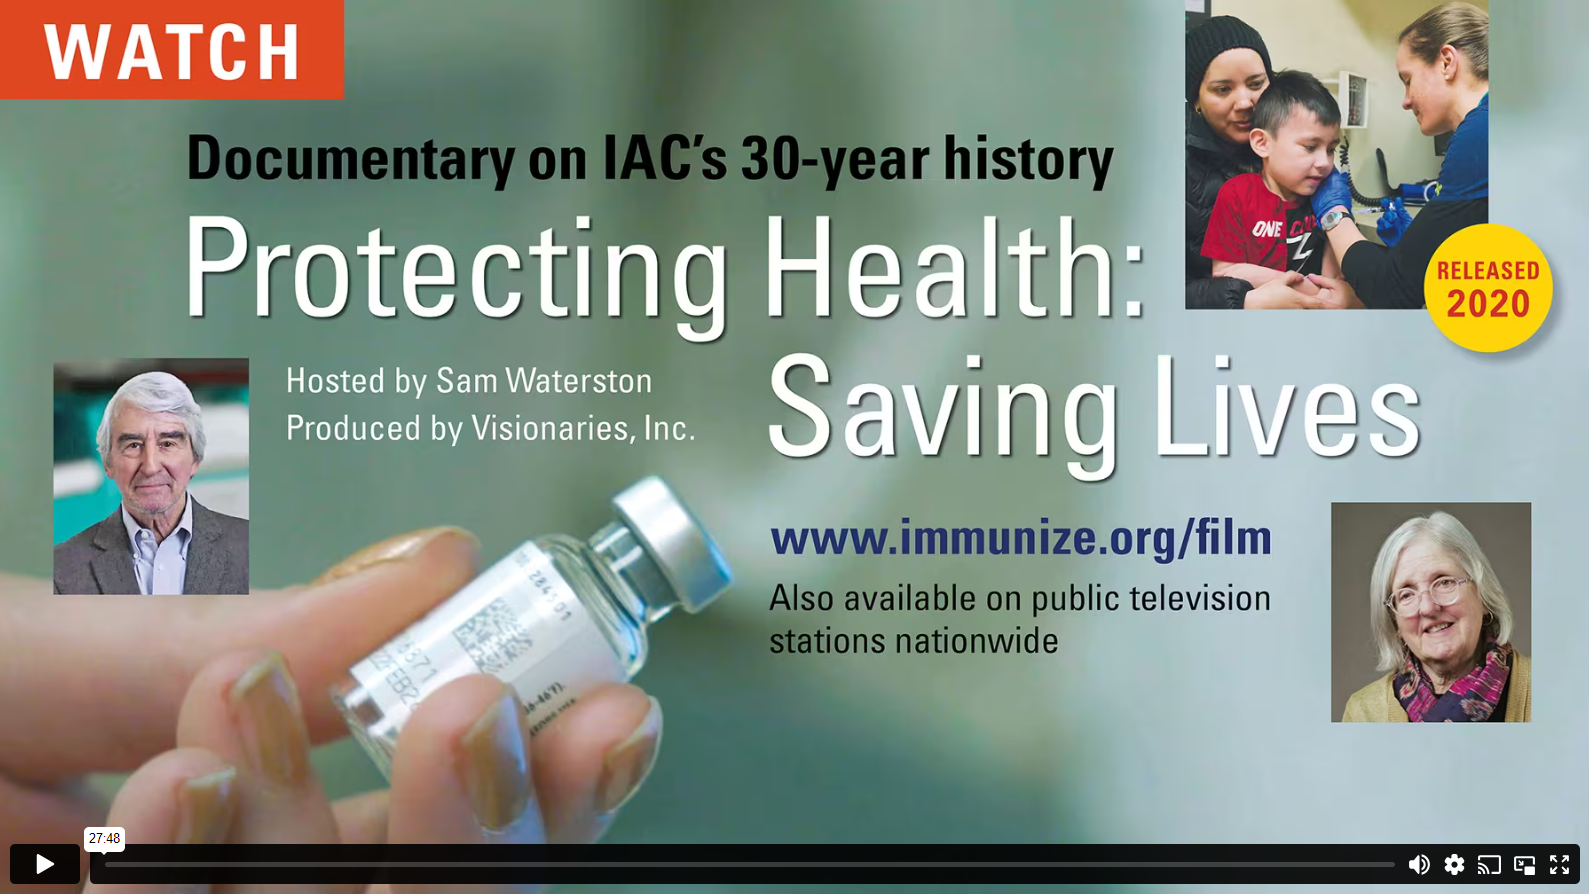 Video controls screen for WATCH: Documentary on IACs 30-year history. Protecting Health: Saving Lives. Hosted by Sam Waterson, Produced by Visionaries, Inc. www.immunize.org/film. Also availableon public television stations nationwide.